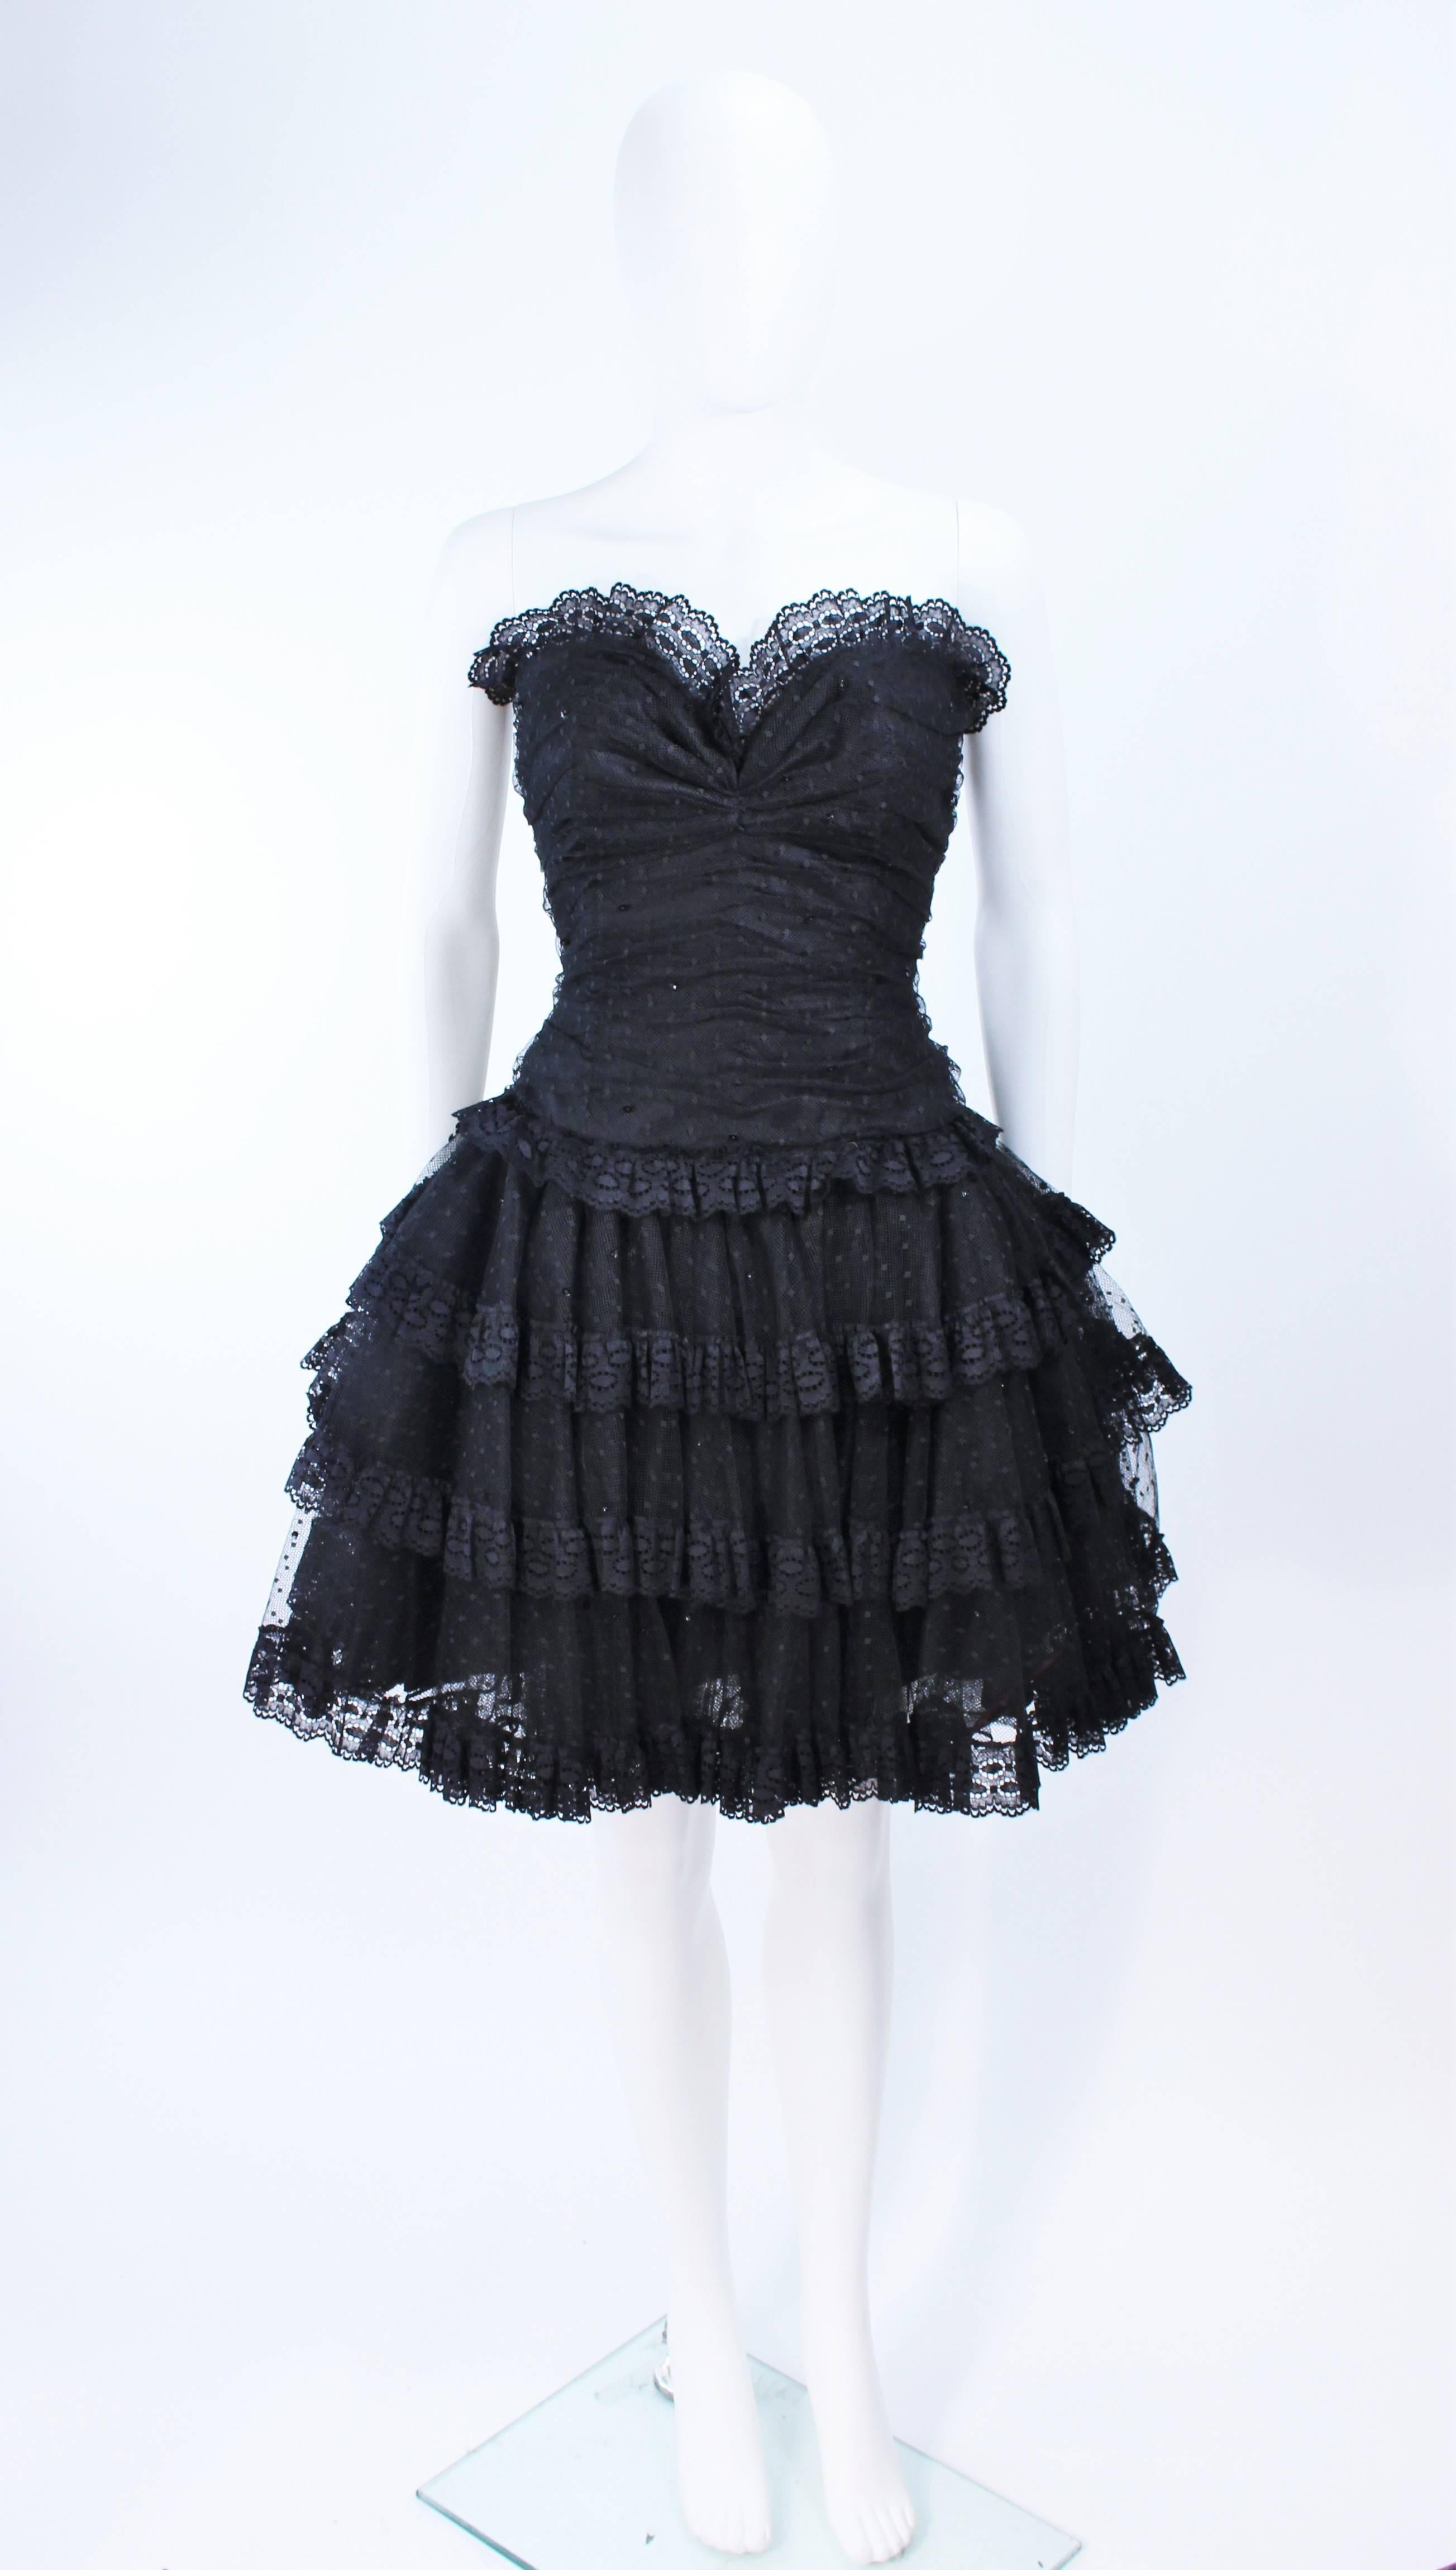 This Dell Los Angeles cocktail dress is composed of tiered ruffled mesh with sequin applique. Features a sweetheart neckline with zipper closure. In excellent vintage condition.

**Please cross-reference measurements for personal accuracy. Size in